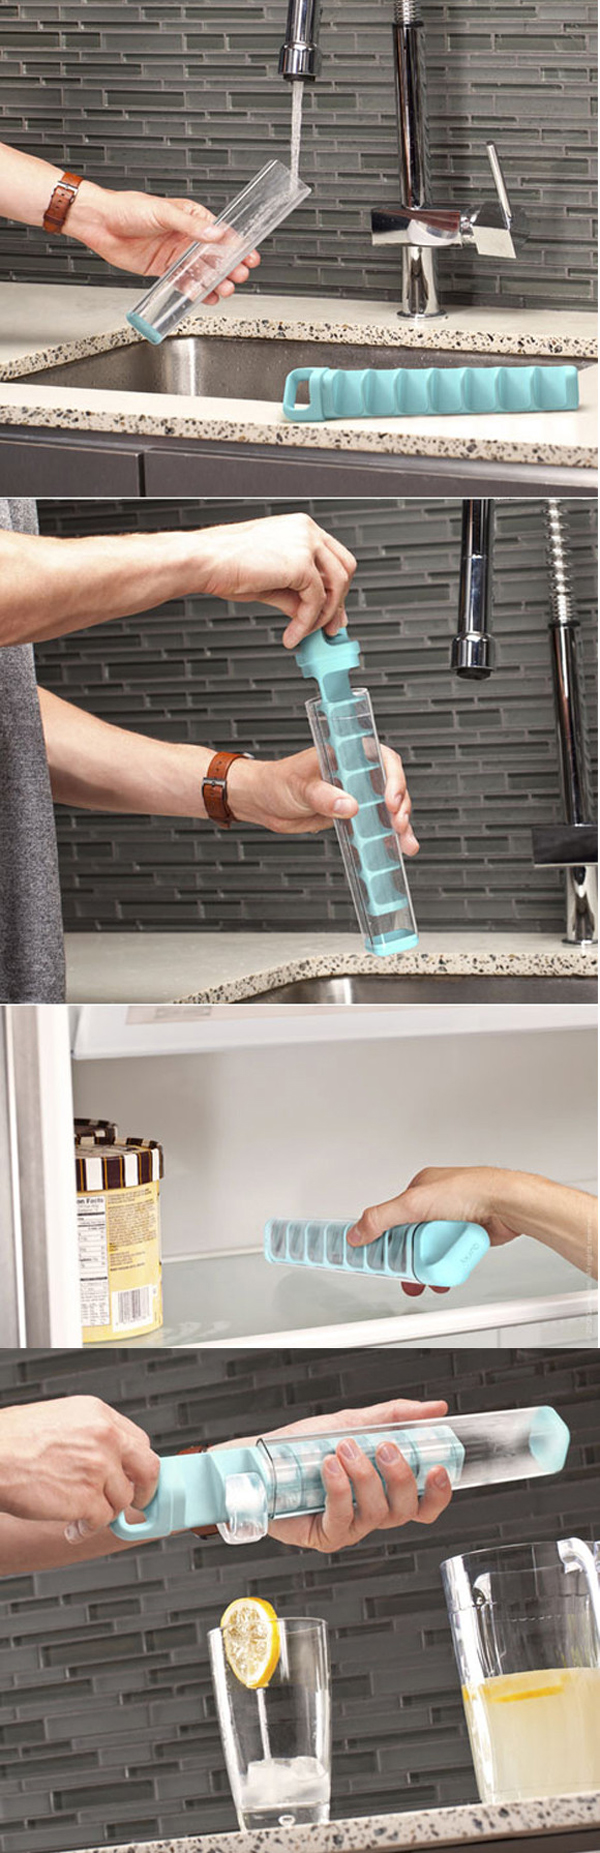 cool ice cube tray